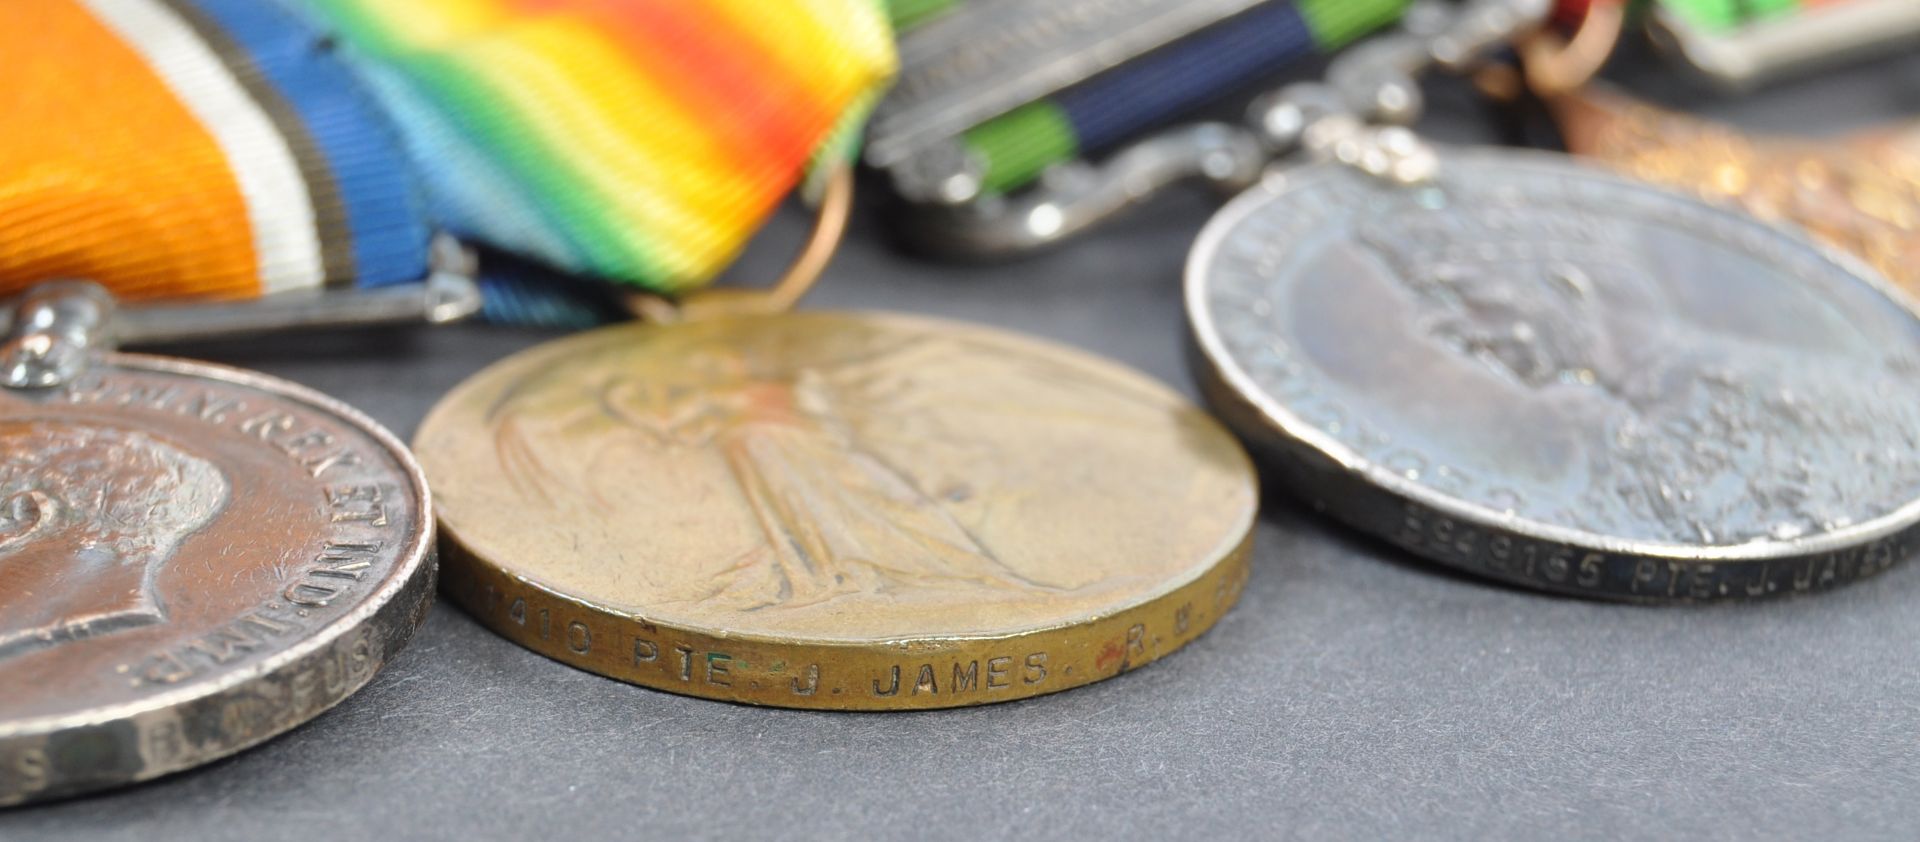 WWI & WWII MEDAL GROUP TO PRIVATE J. JAMES OF ROYAL WELCH FUSILIERS - Image 4 of 7